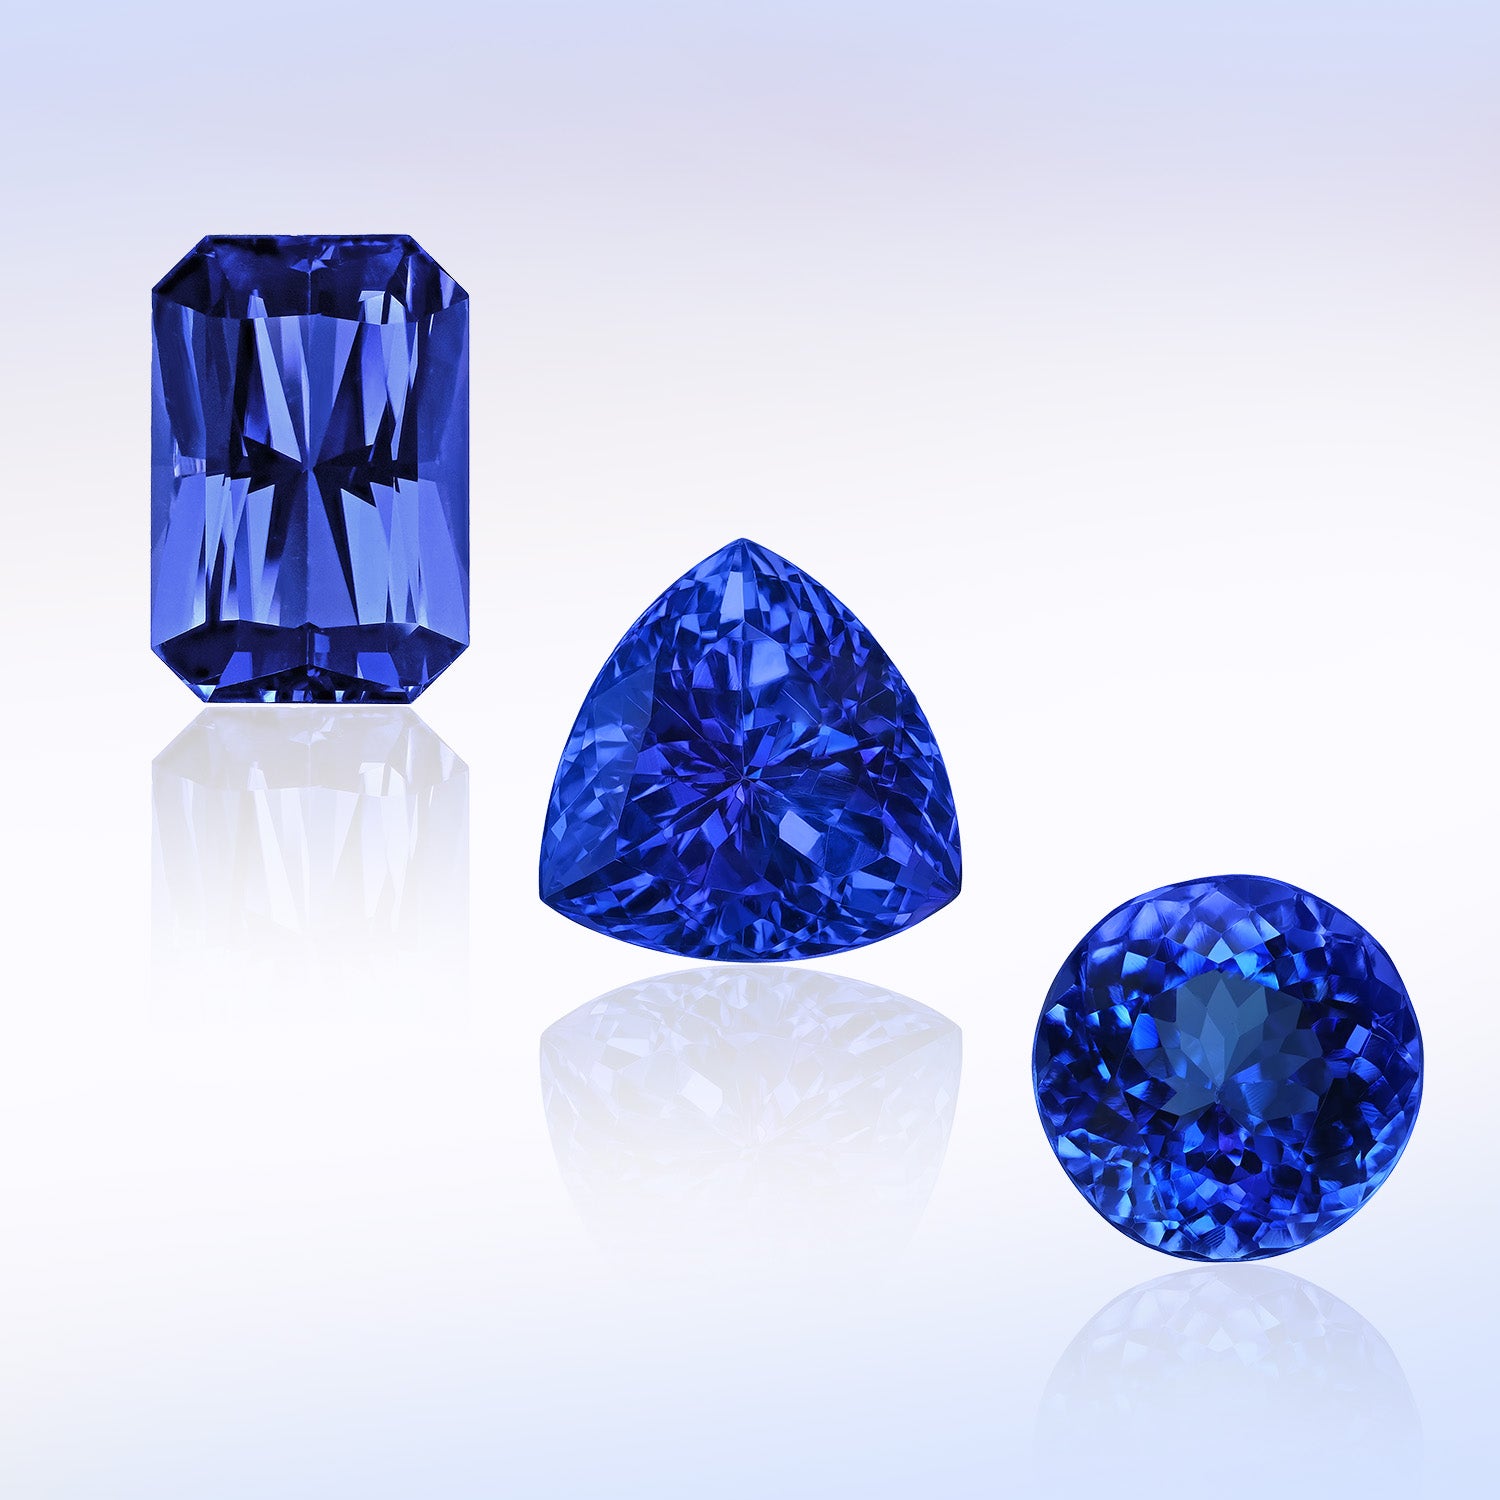 Before Investing in Tanzanite, Read This to Verify its Authenticity